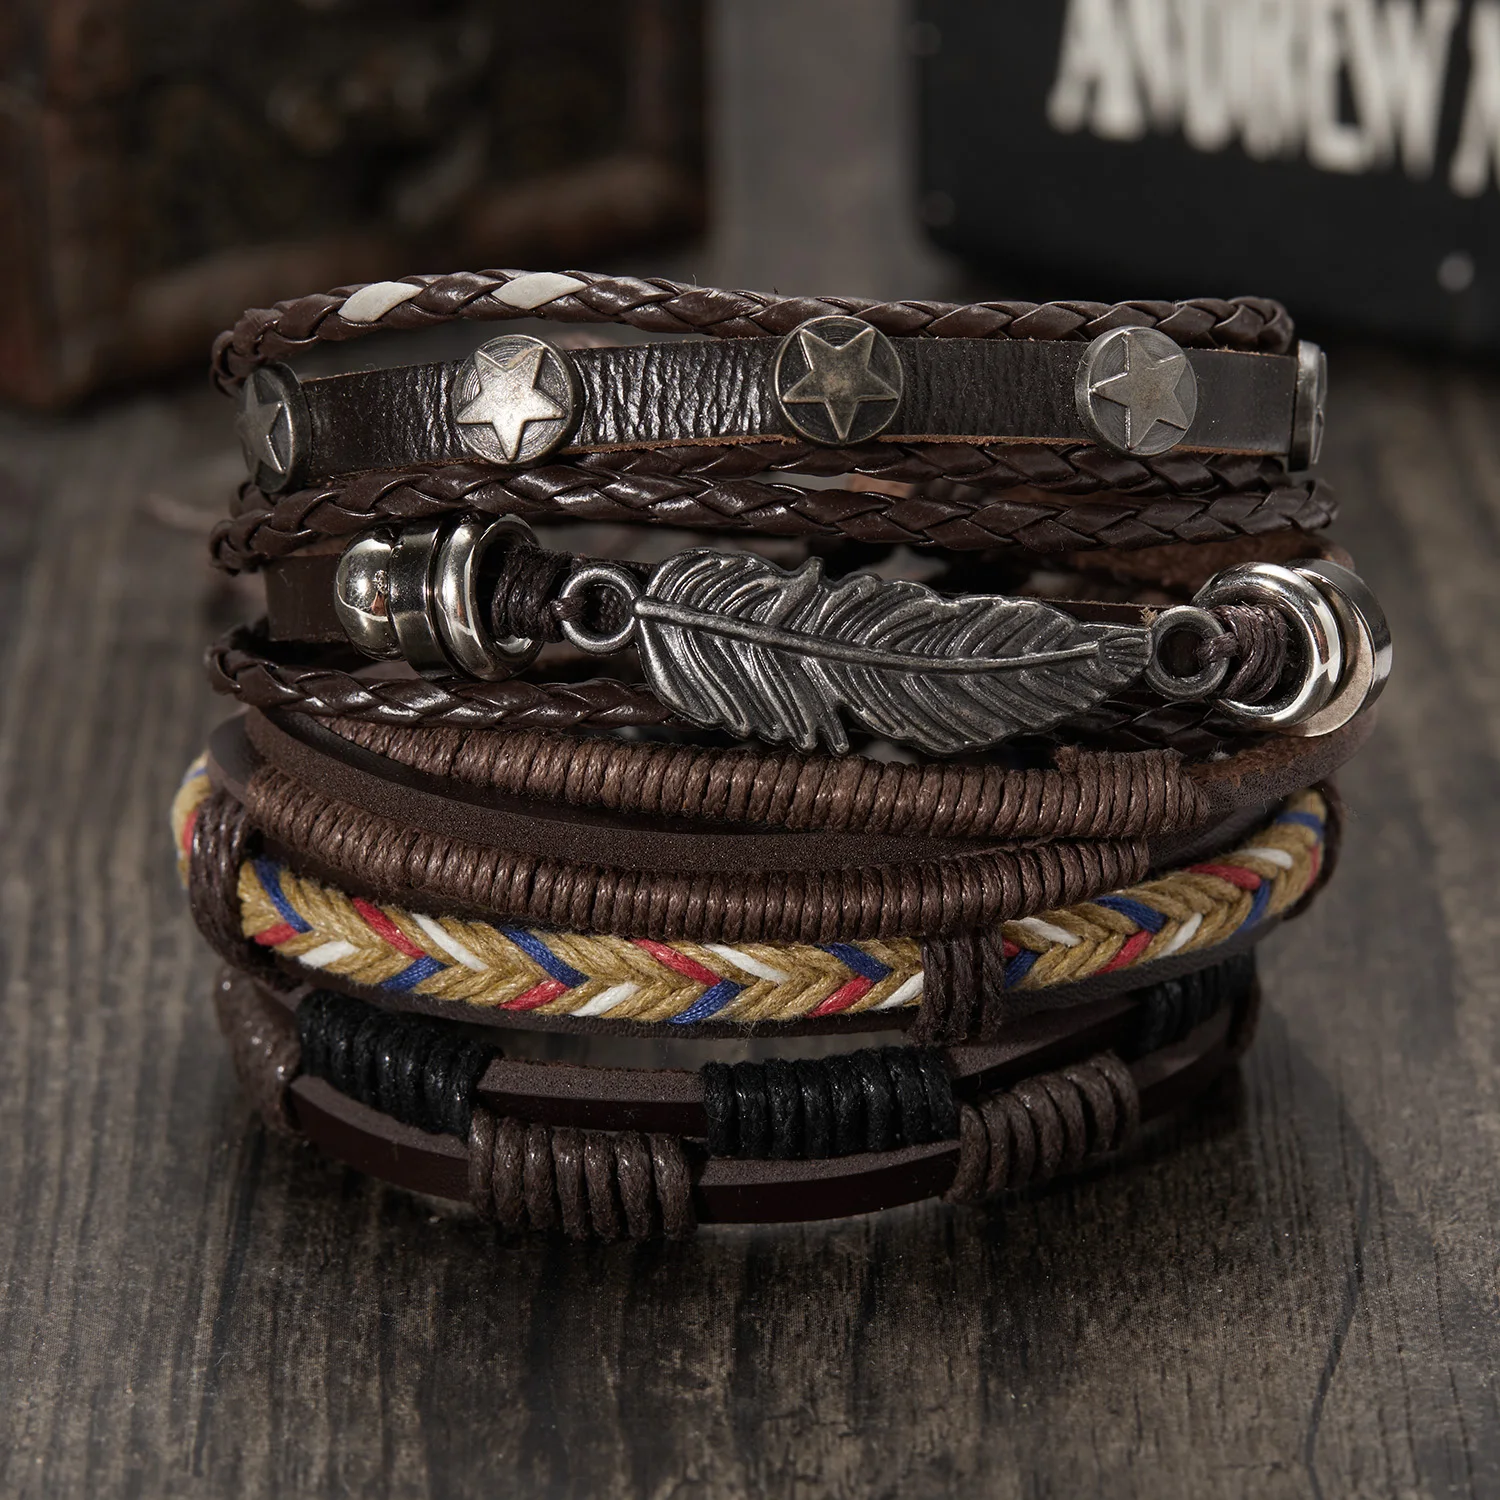 

Vintage Braided Wrap Leather Bracelets for Men Punk Multilayer Handmade Feather Wood Beads Rope Bracelet Male Wristbands Jewelry